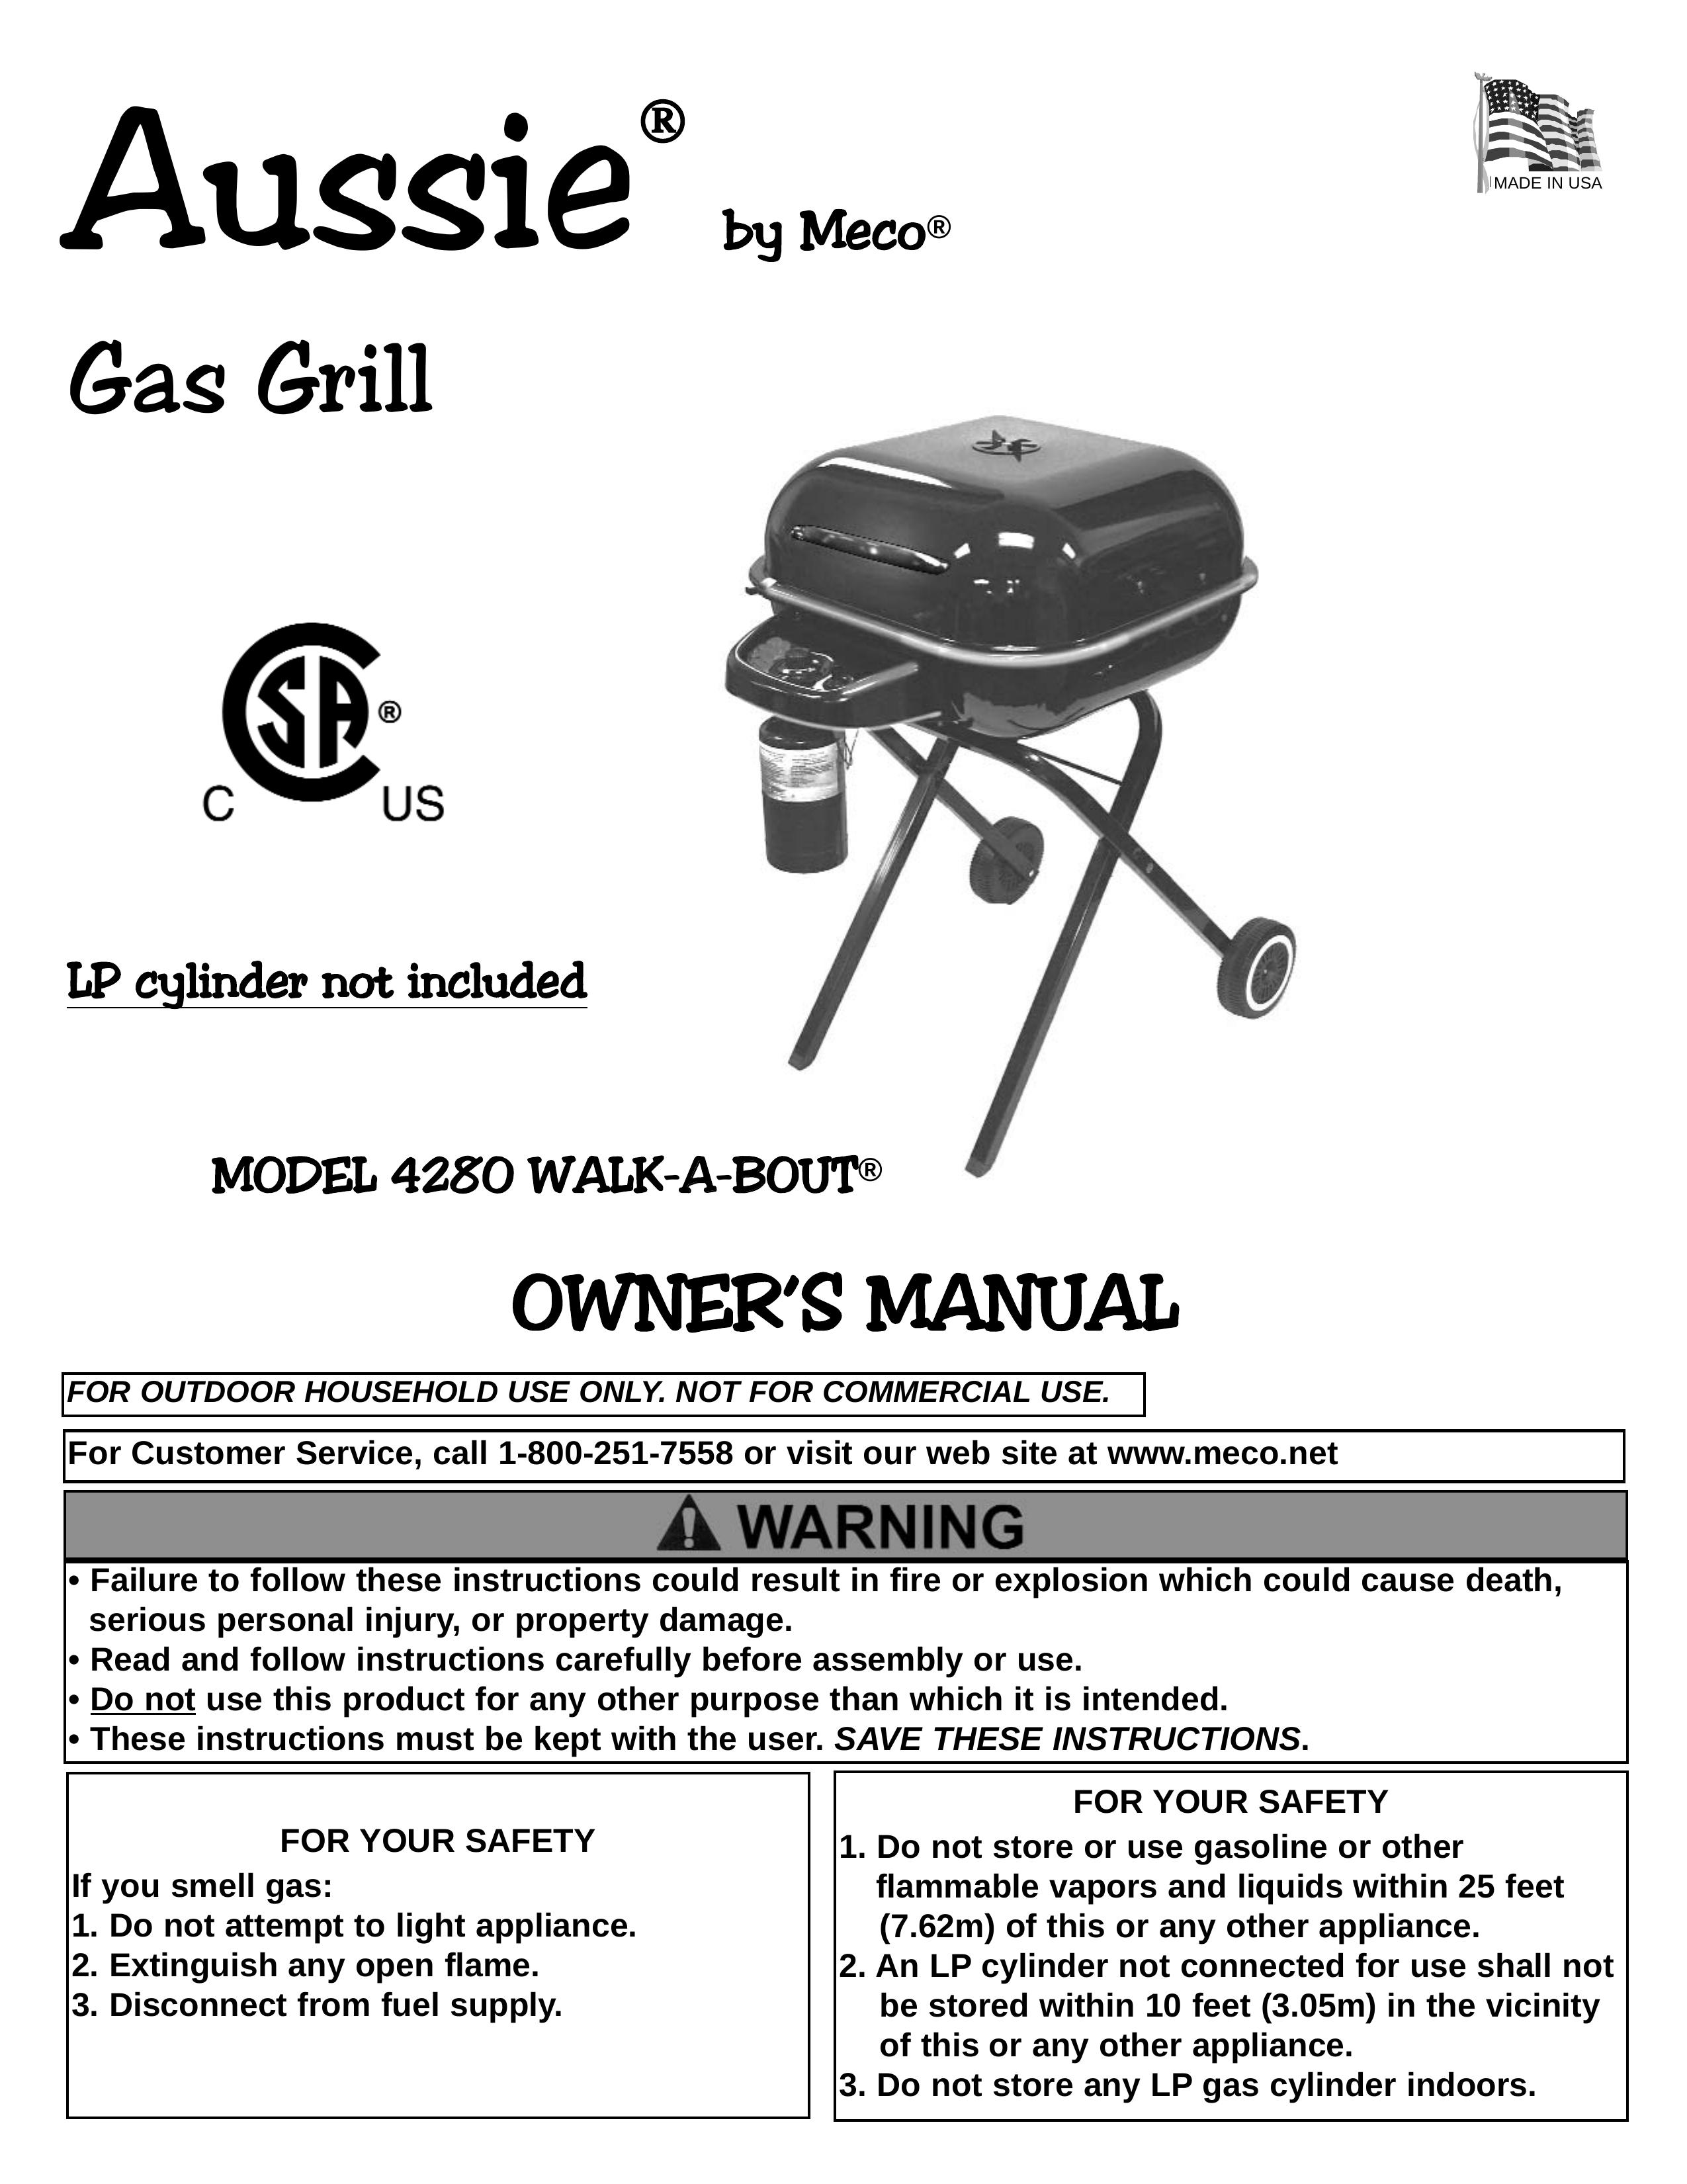 Meco 4280 Walk-a-bout Gas Grill User Manual